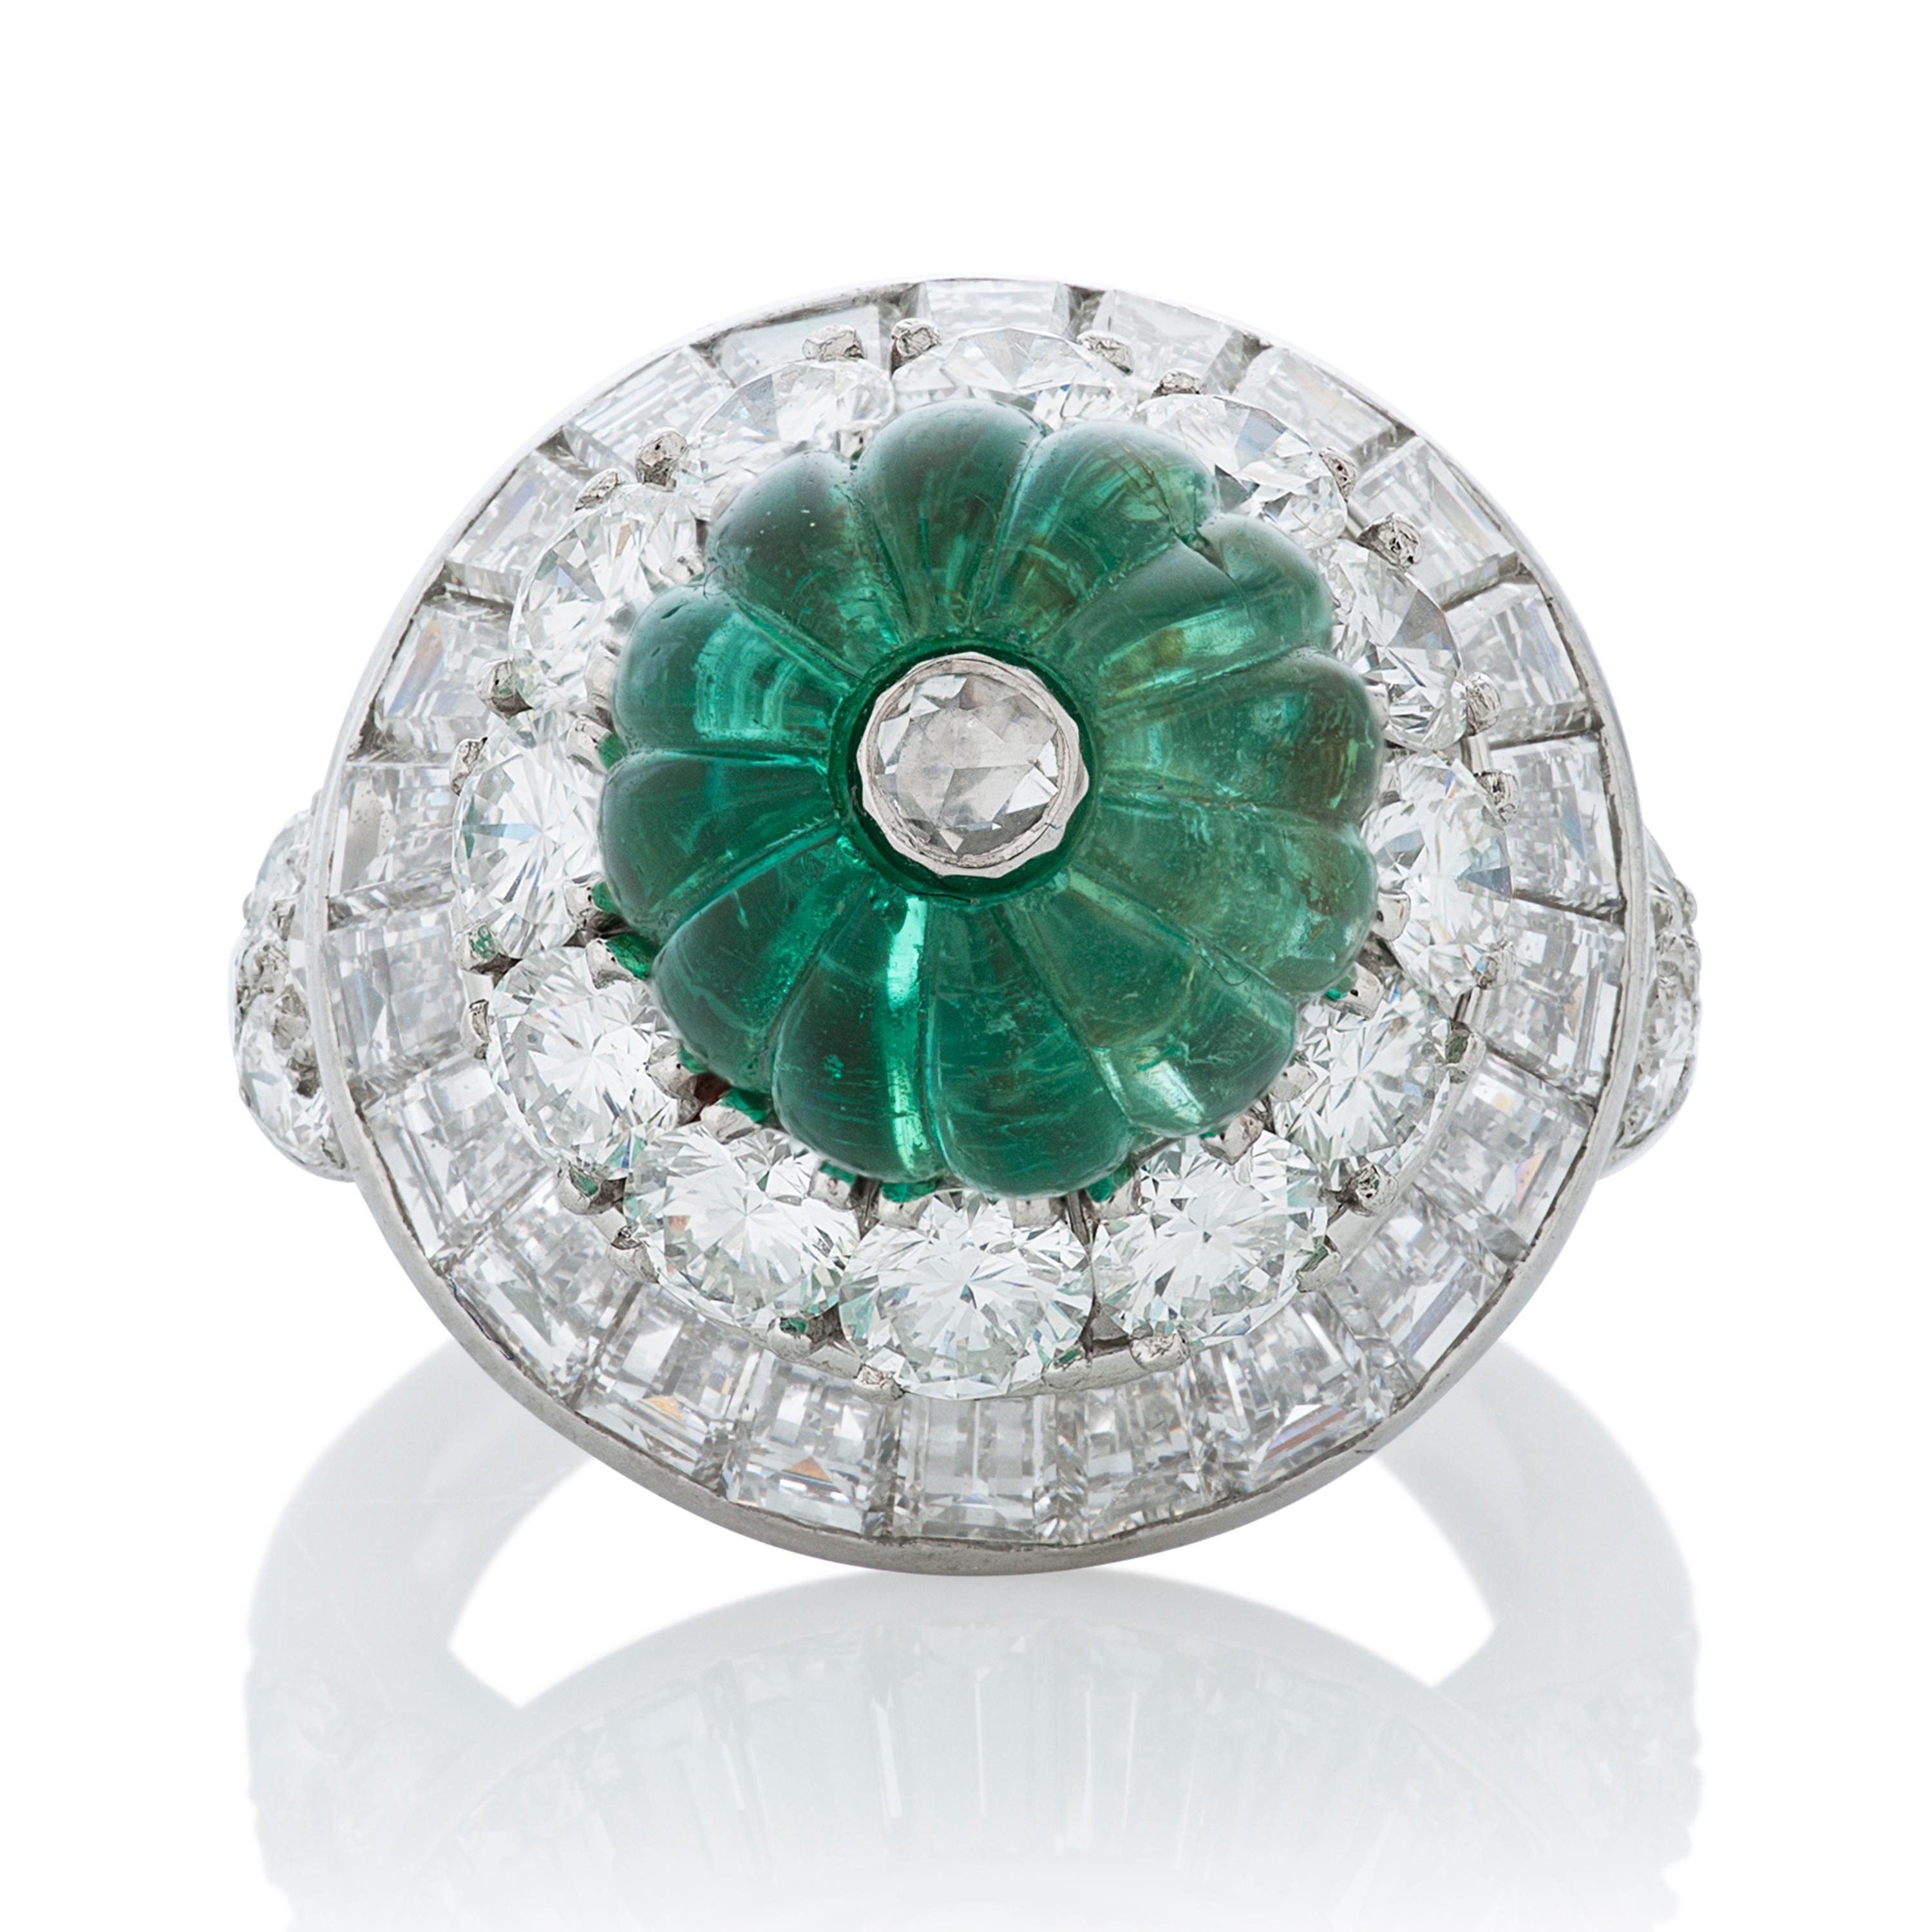 Women's Vintage David Webb 5.10ct Carved Emerald Bead and Diamond Ring in Platinum&18kwg